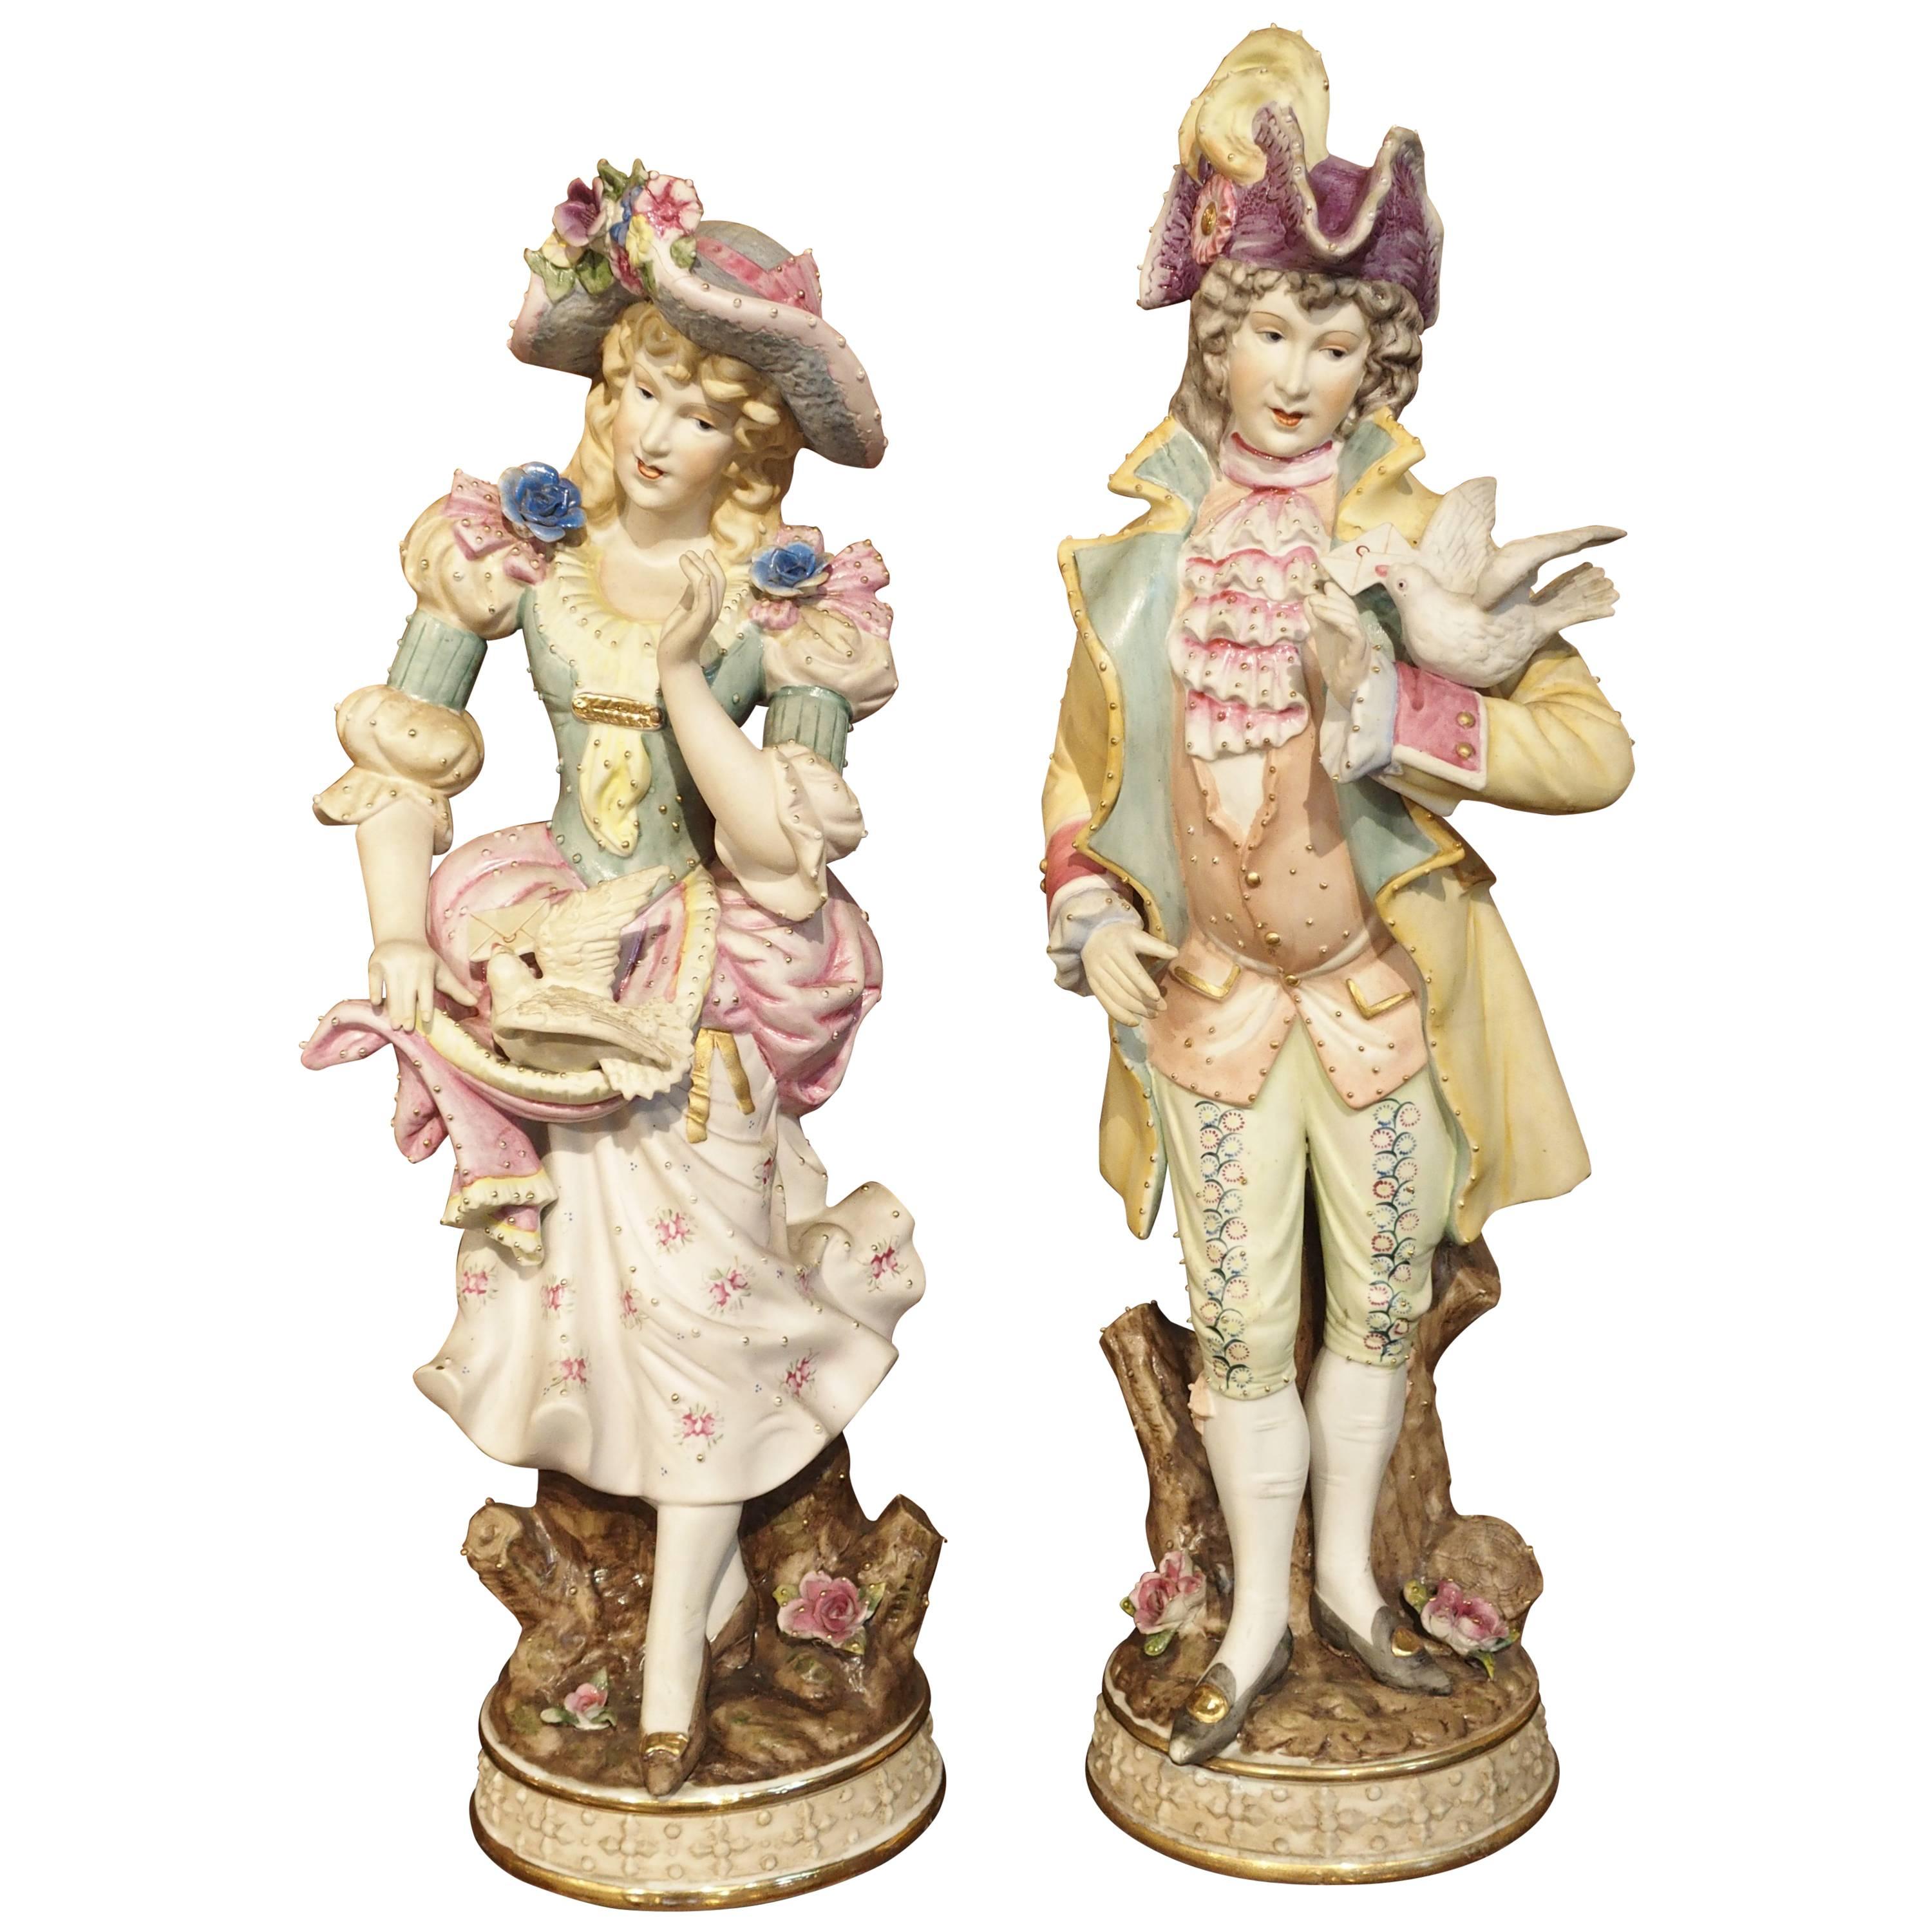 Pair of Early 1900s Hand-Painted Bisque Figures